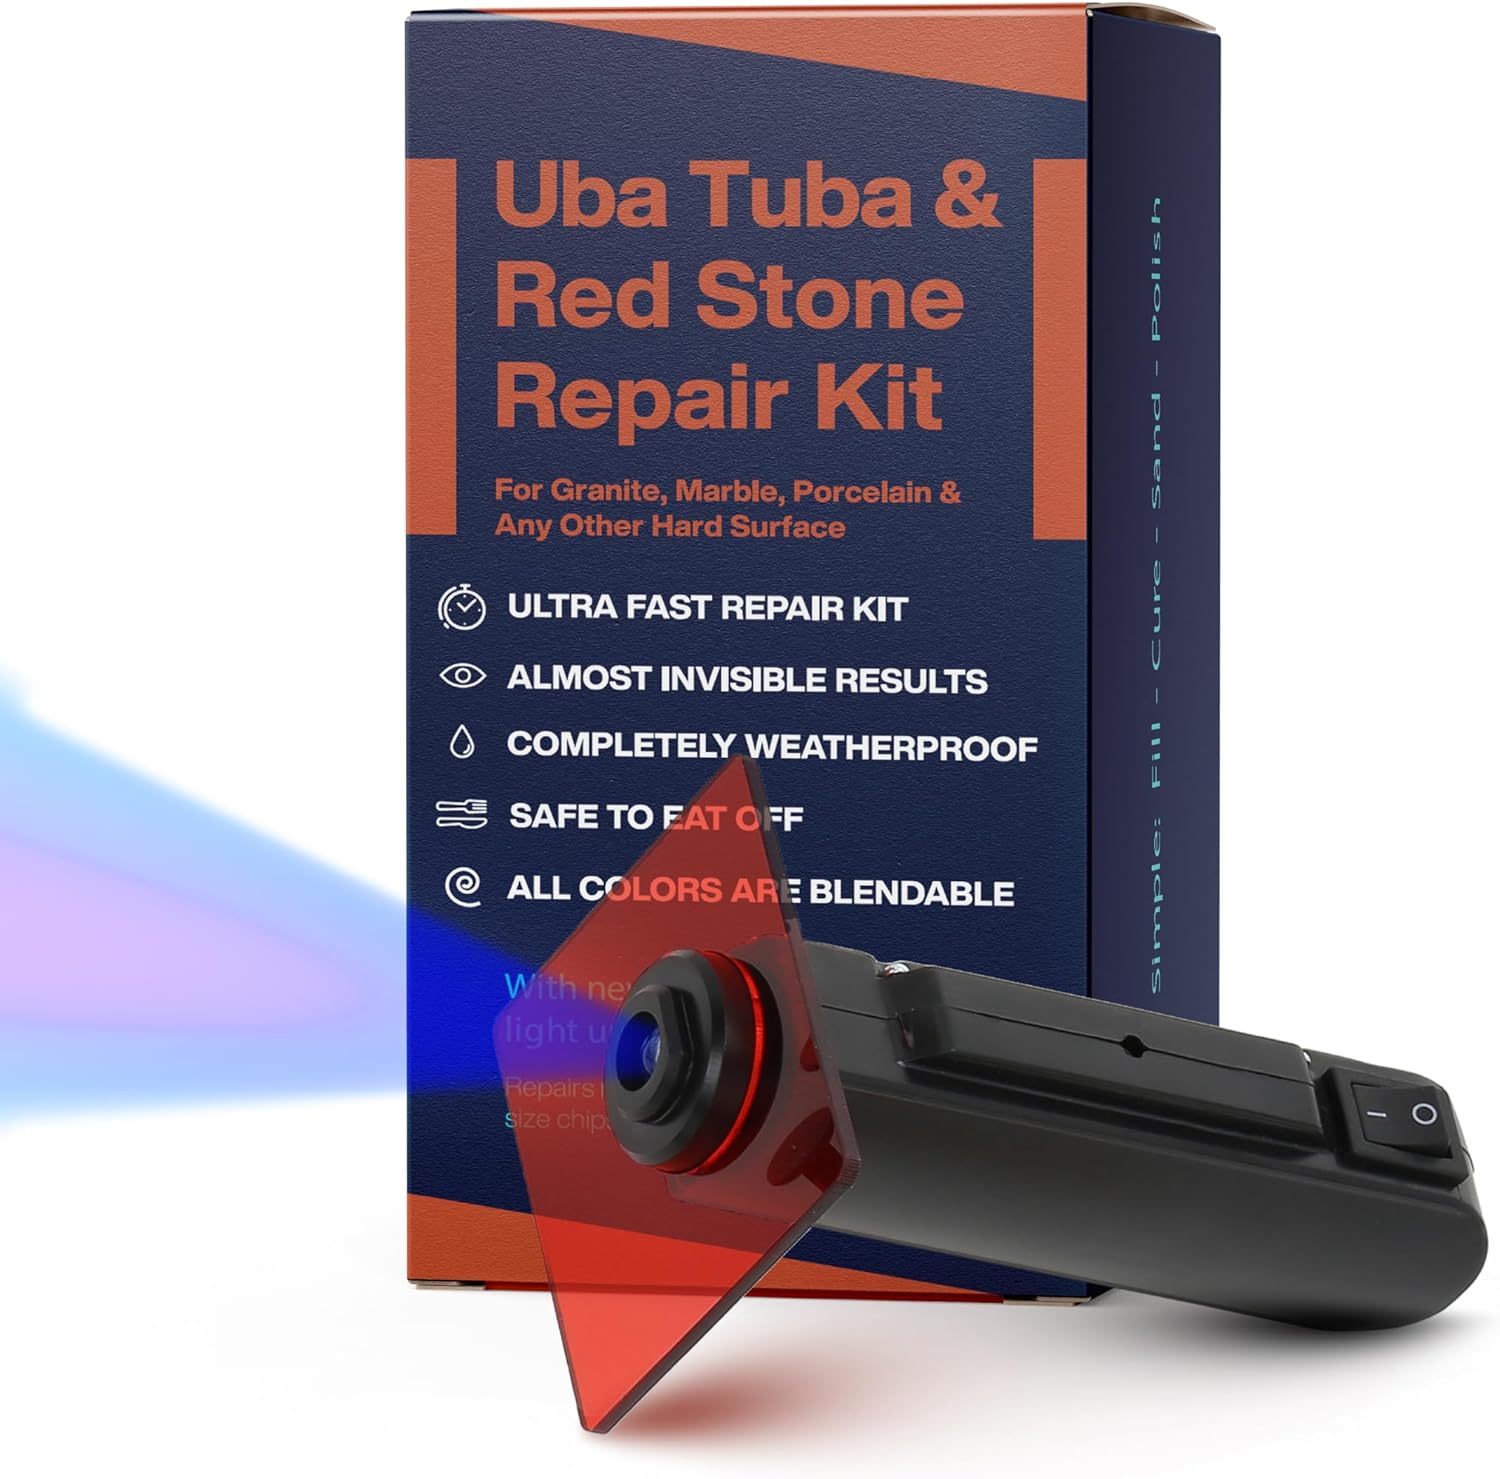 Uba Tuba & Red Stone Repair Kit (Red, Black & Clear Color) - Ideal